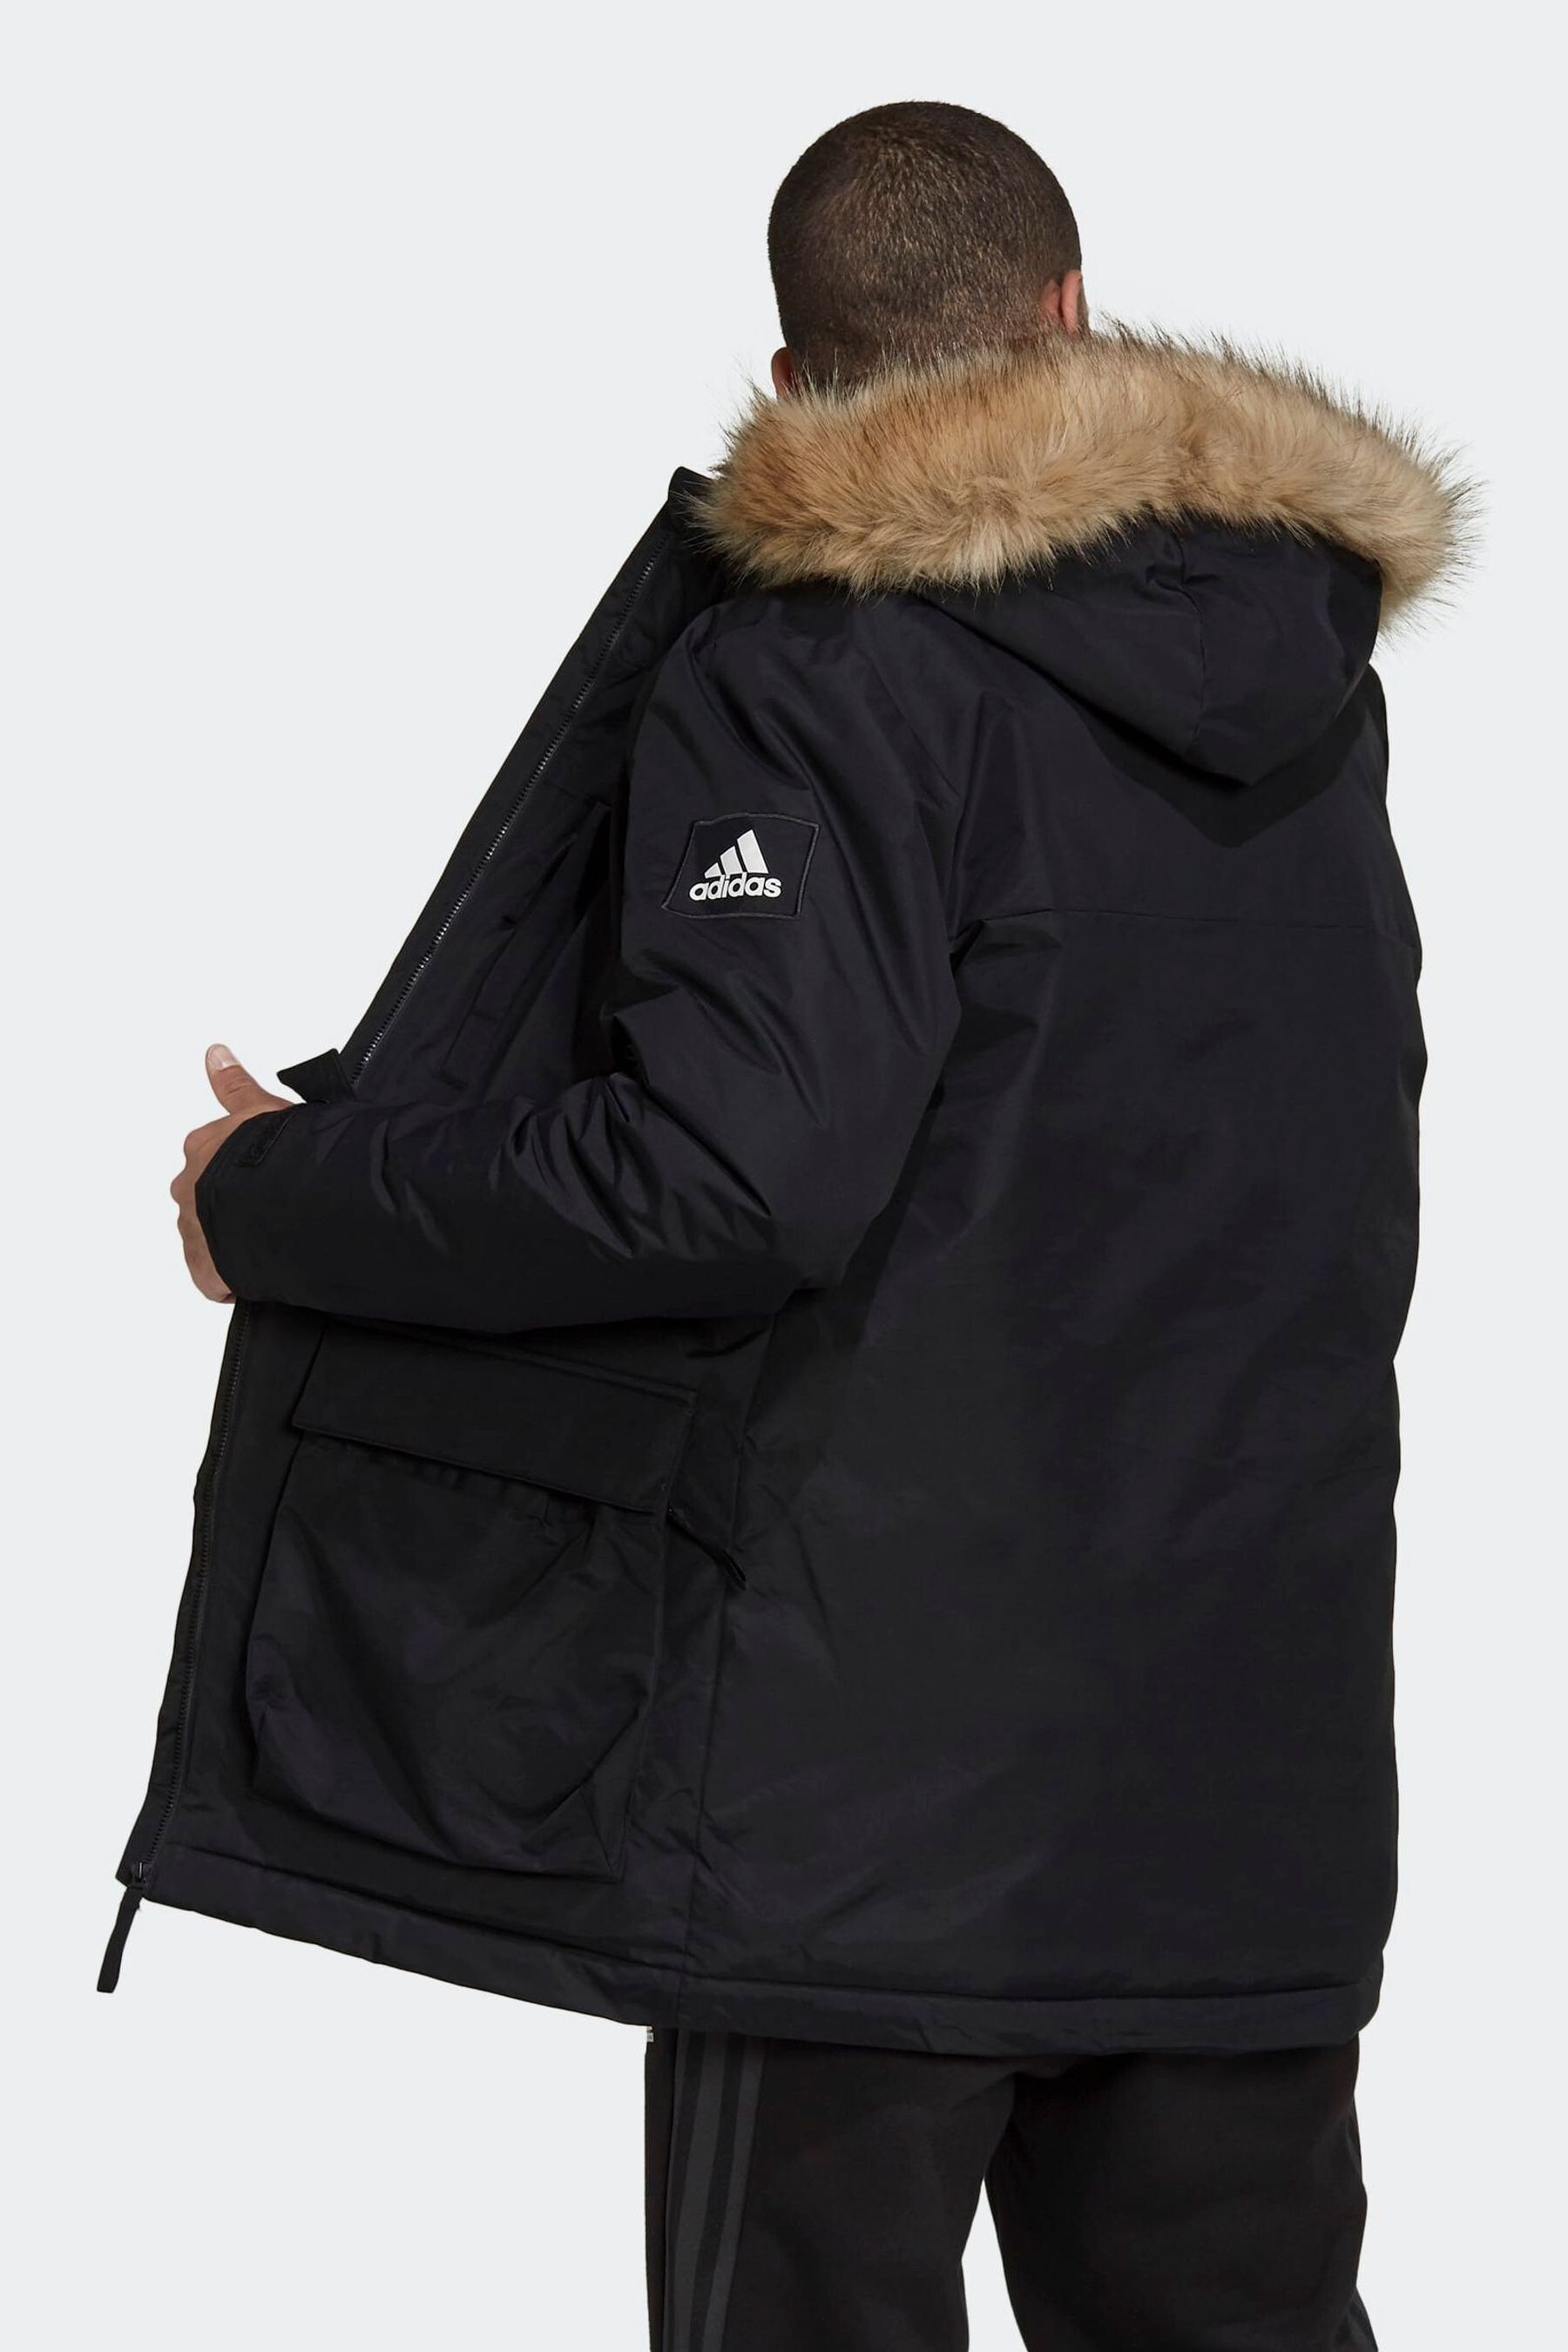 Buy adidas Black Utilitas Hooded Parka from the Next UK online shop